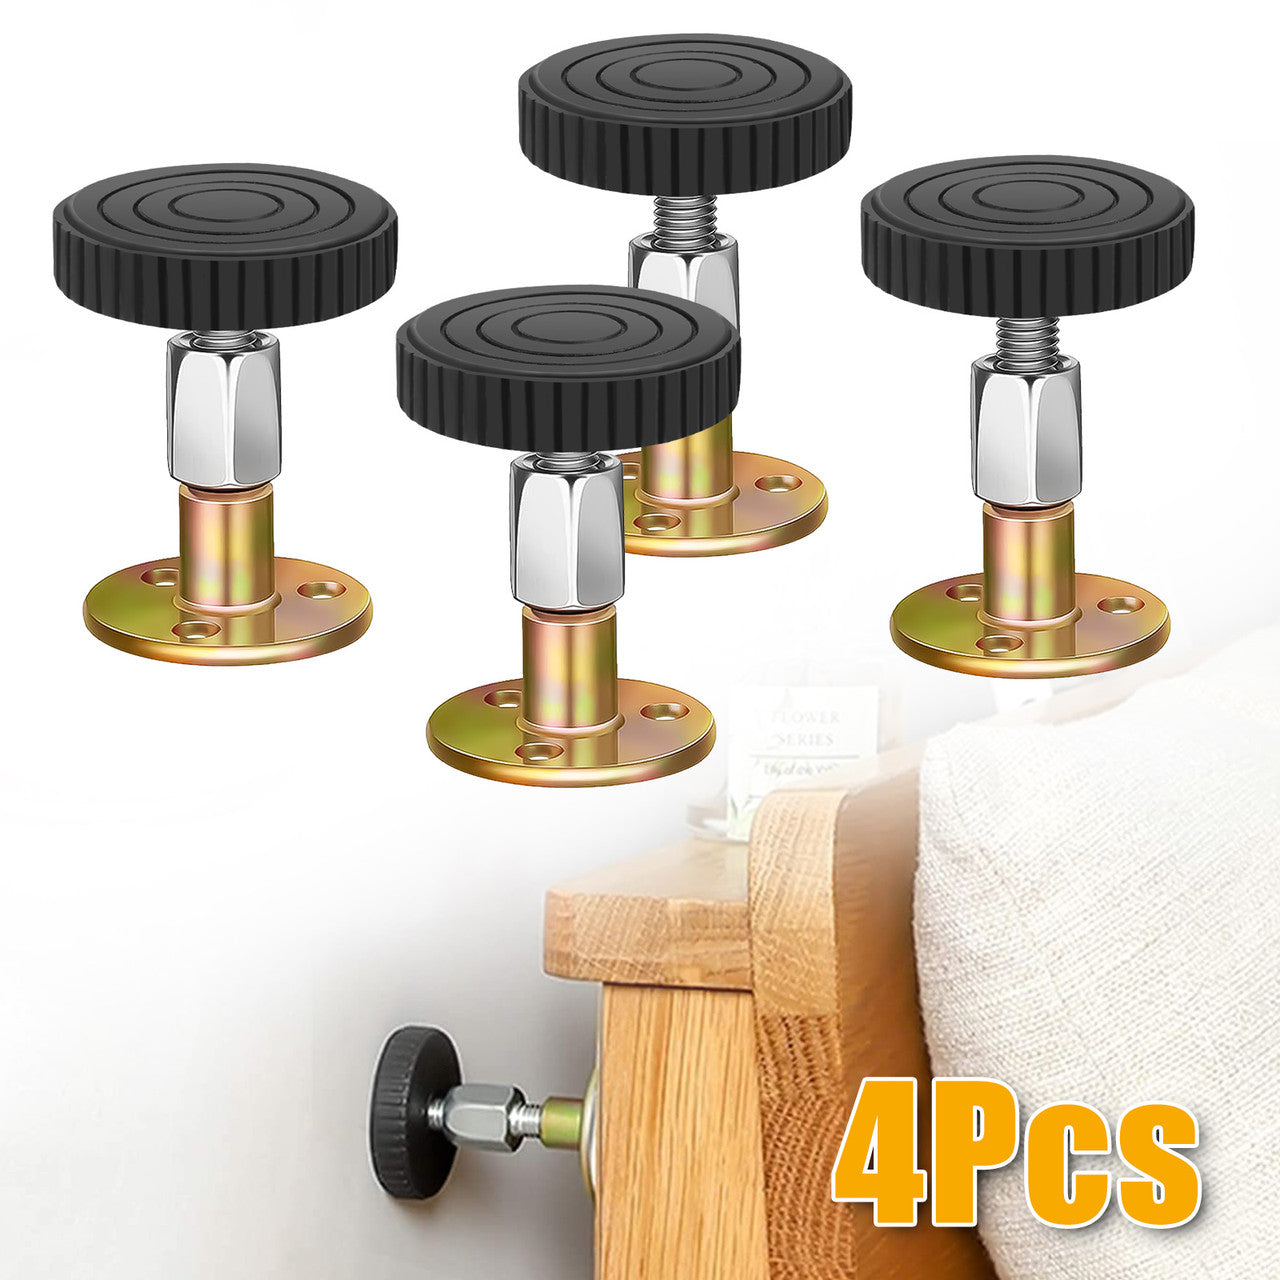 4 Pcs Threaded Bed Frame Anti Shake Tool - Effectively Reduces Noise,Protects Your Walls from Damagefor Home Bed Furniture Cabinets